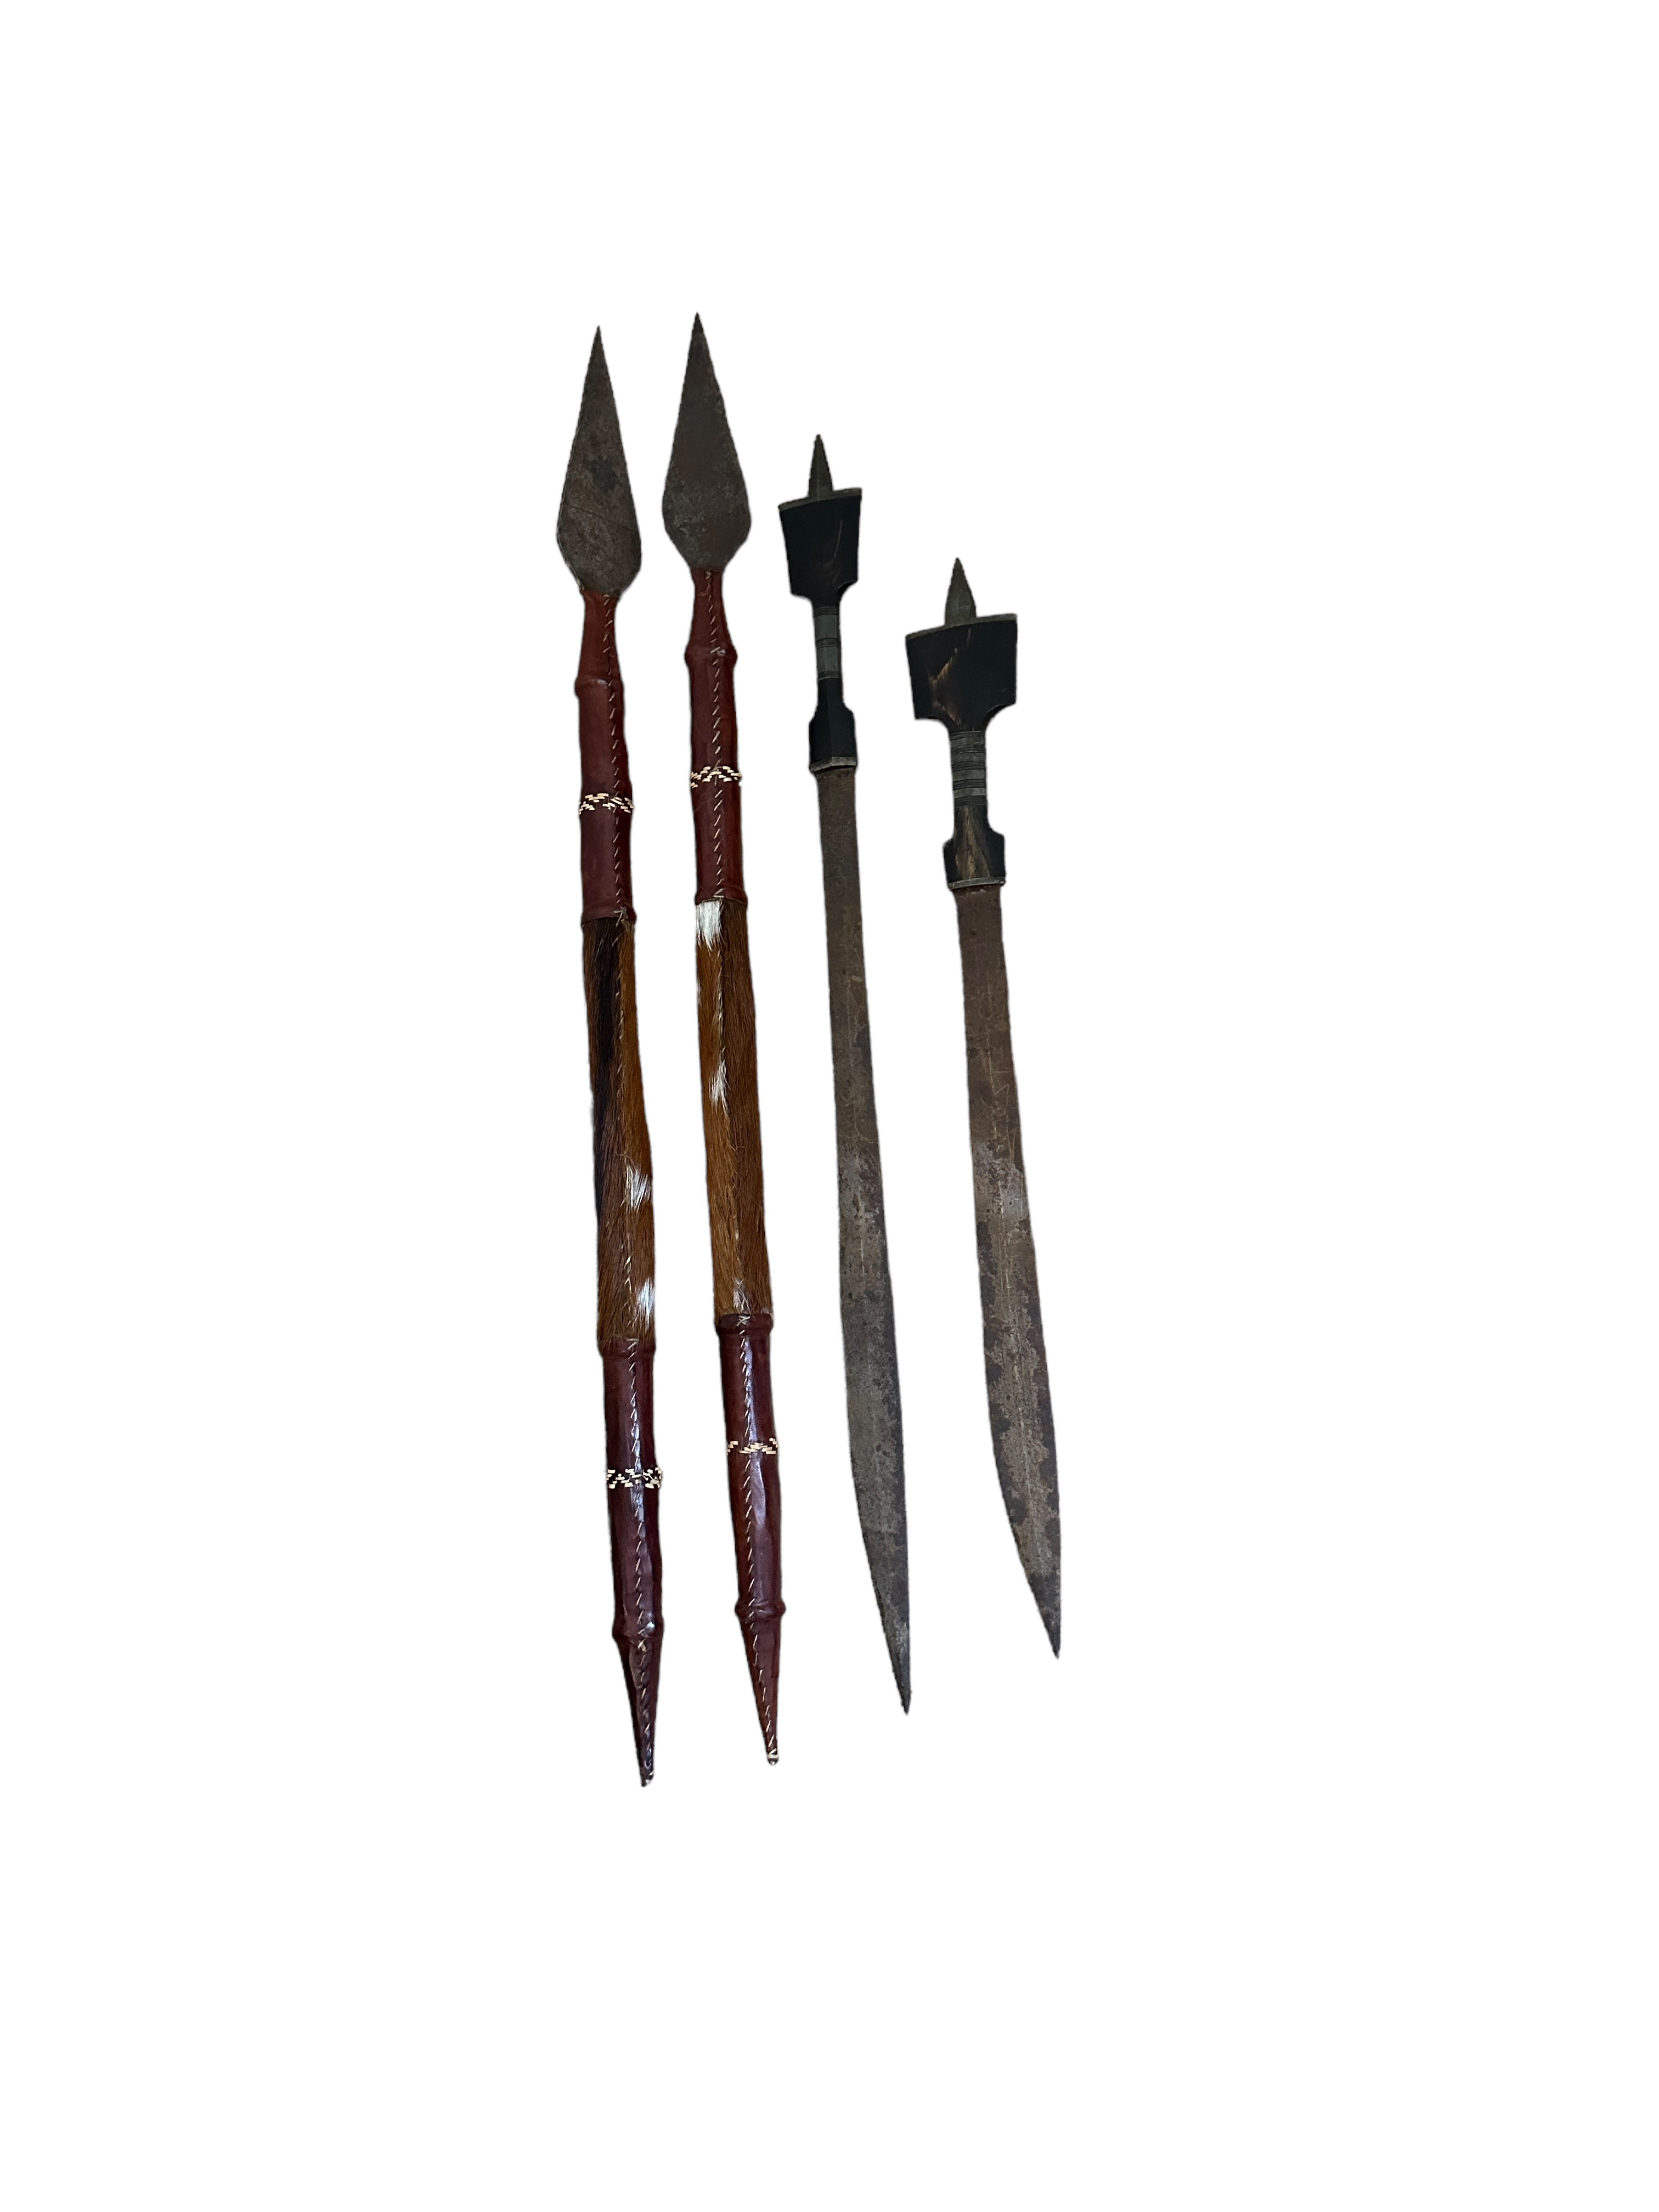 Duo of African Swords 74cm and 63cm and duo of Hide Covered Spears - 86cm long.